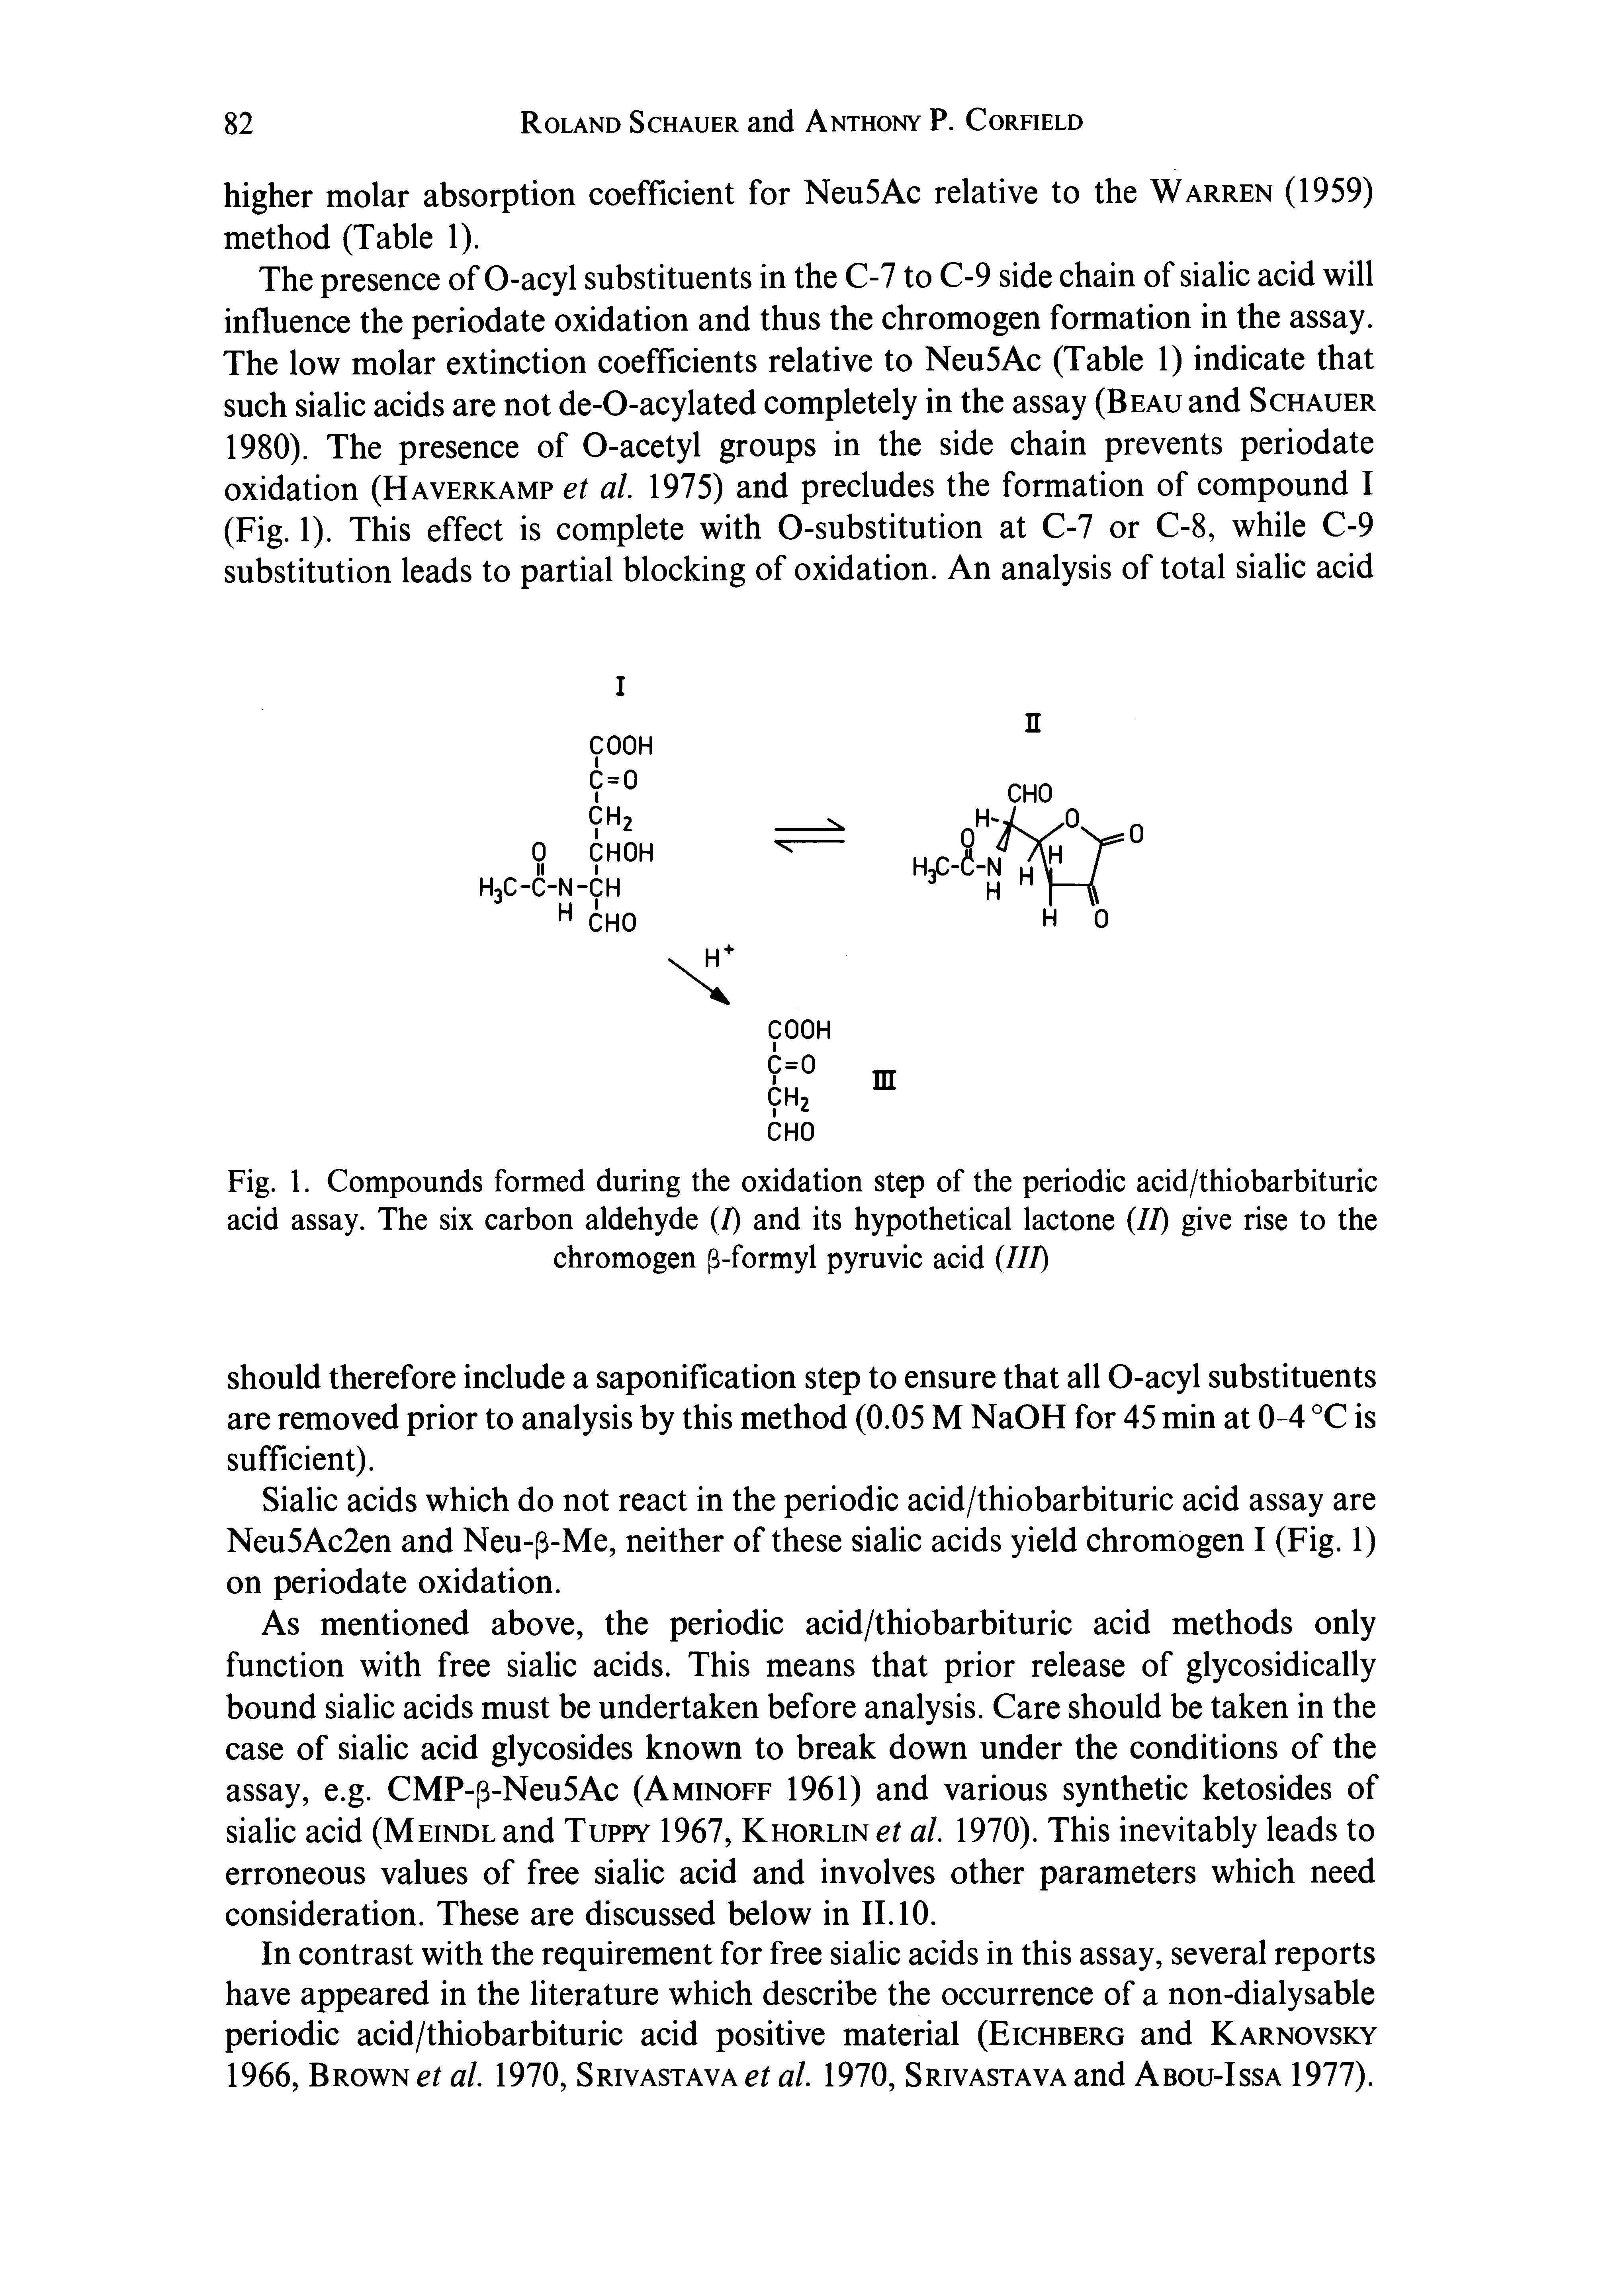 Fig. 1. Compounds formed during the oxidation step of the periodic acid/thiobarbituric acid assay. The six carbon aldehyde (7) and its hypothetical lactone (II) give rise to the chromogen p-formyl pyruvic acid (III)...